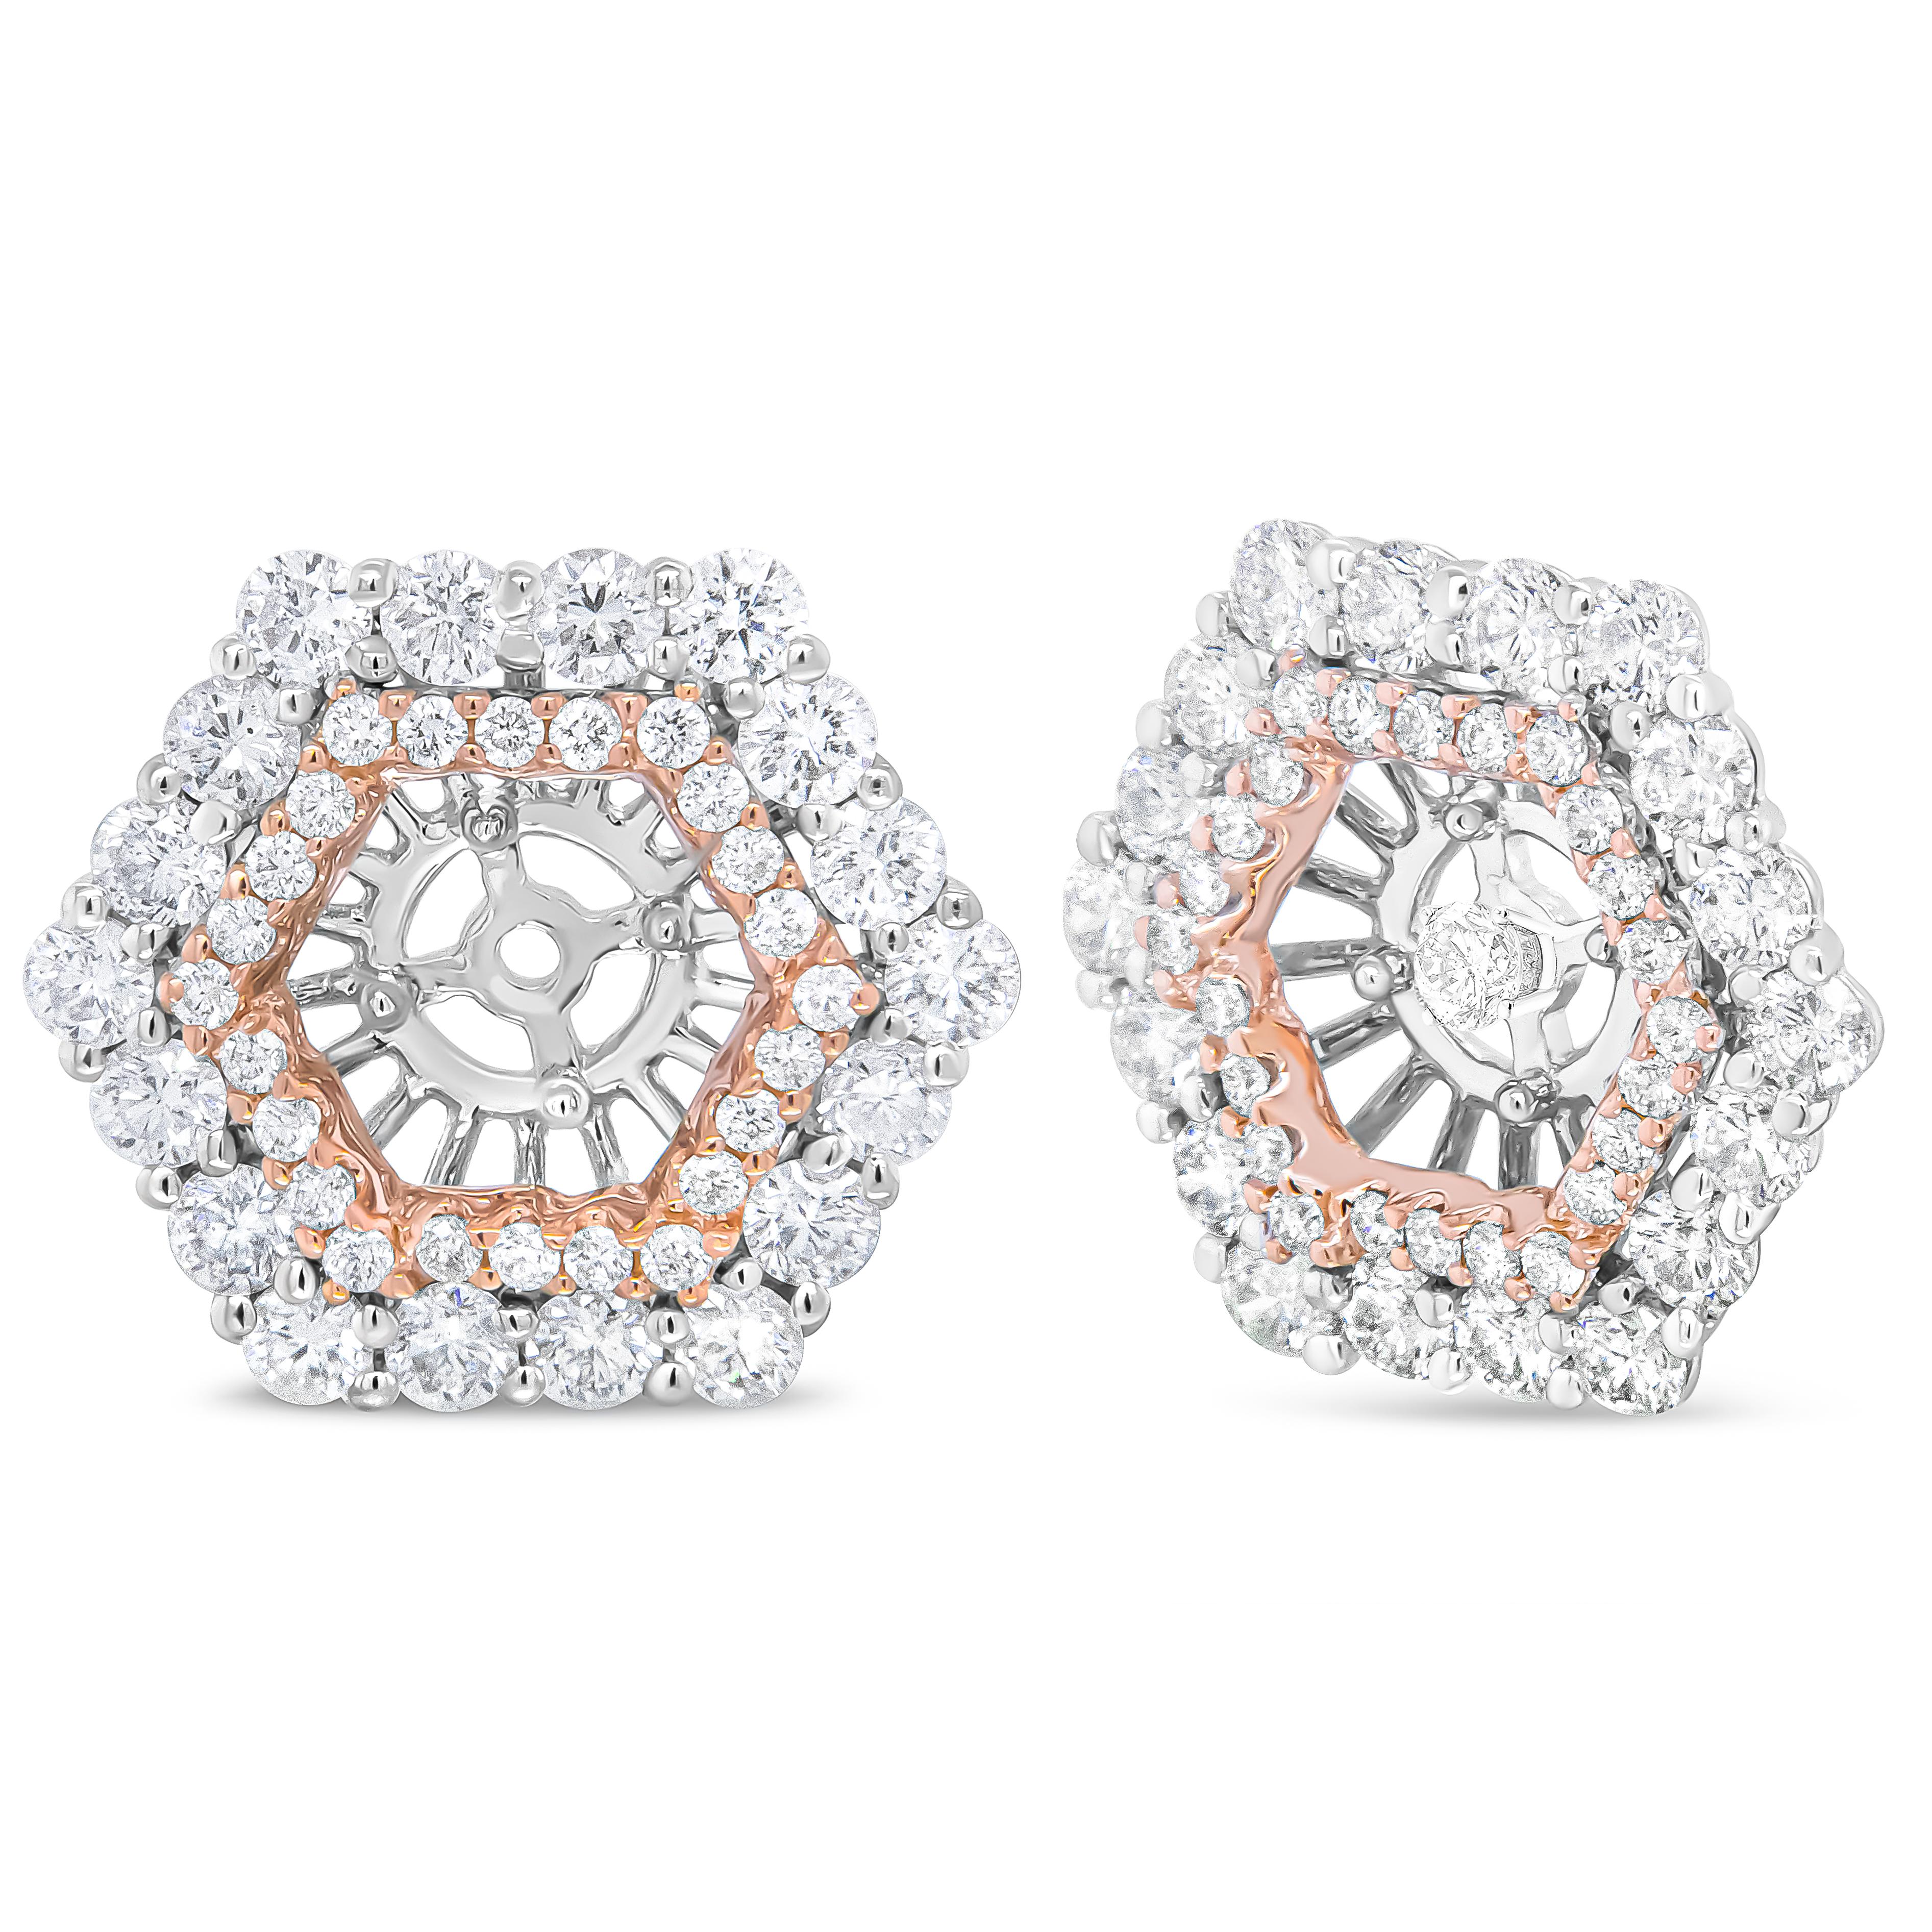 Upgrade your existing stud earrings with the sensational halo style of this diamond earring jacket that fits earrings up to 6 MM. A dazzling two tone look comes from the genuine 14k rose and white gold metal. A double hexagonal halo will dazzle your